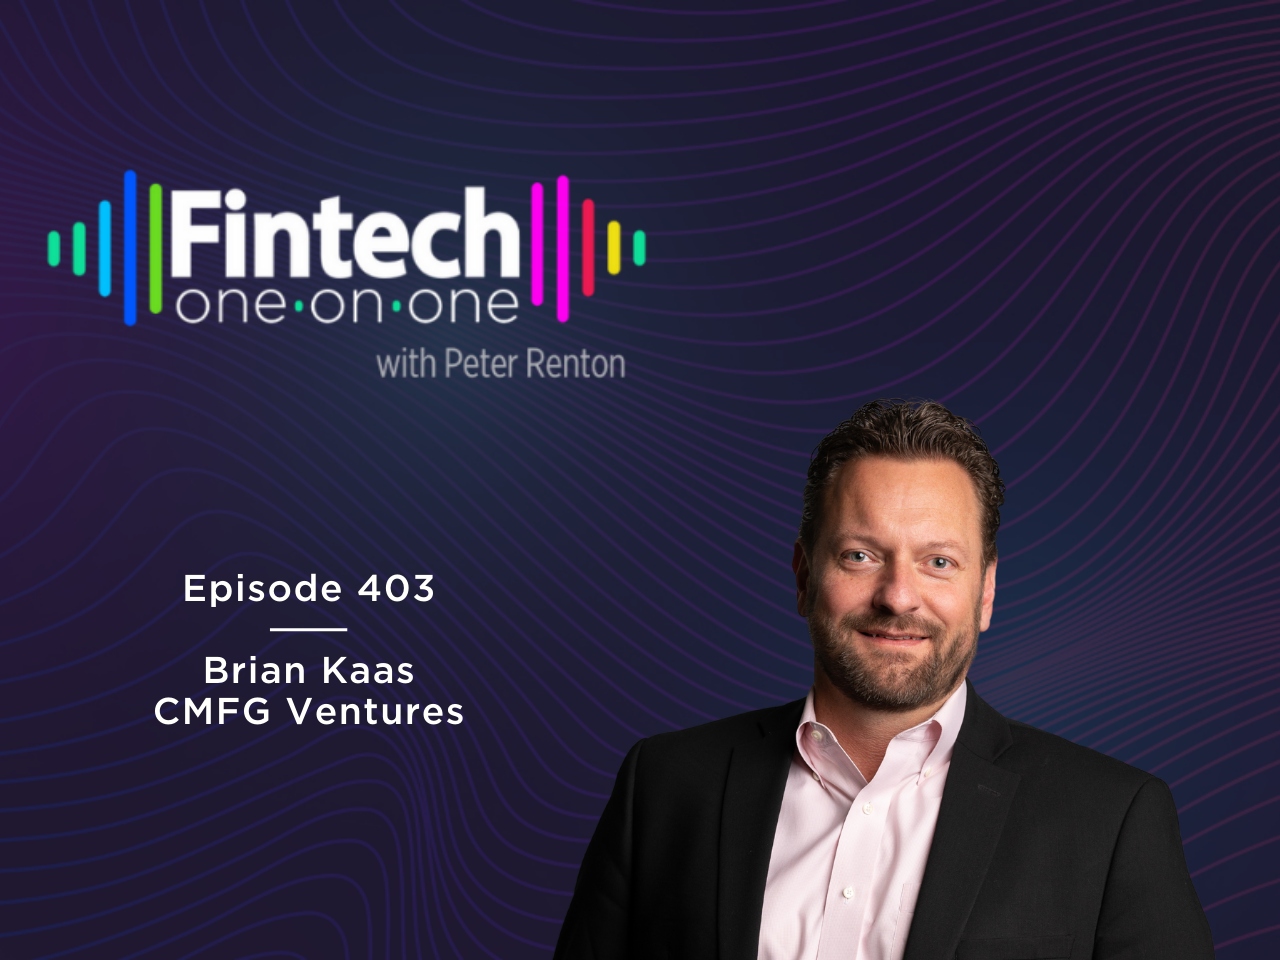 Brian Kaas, President and Managing Director of CMFG Ventures